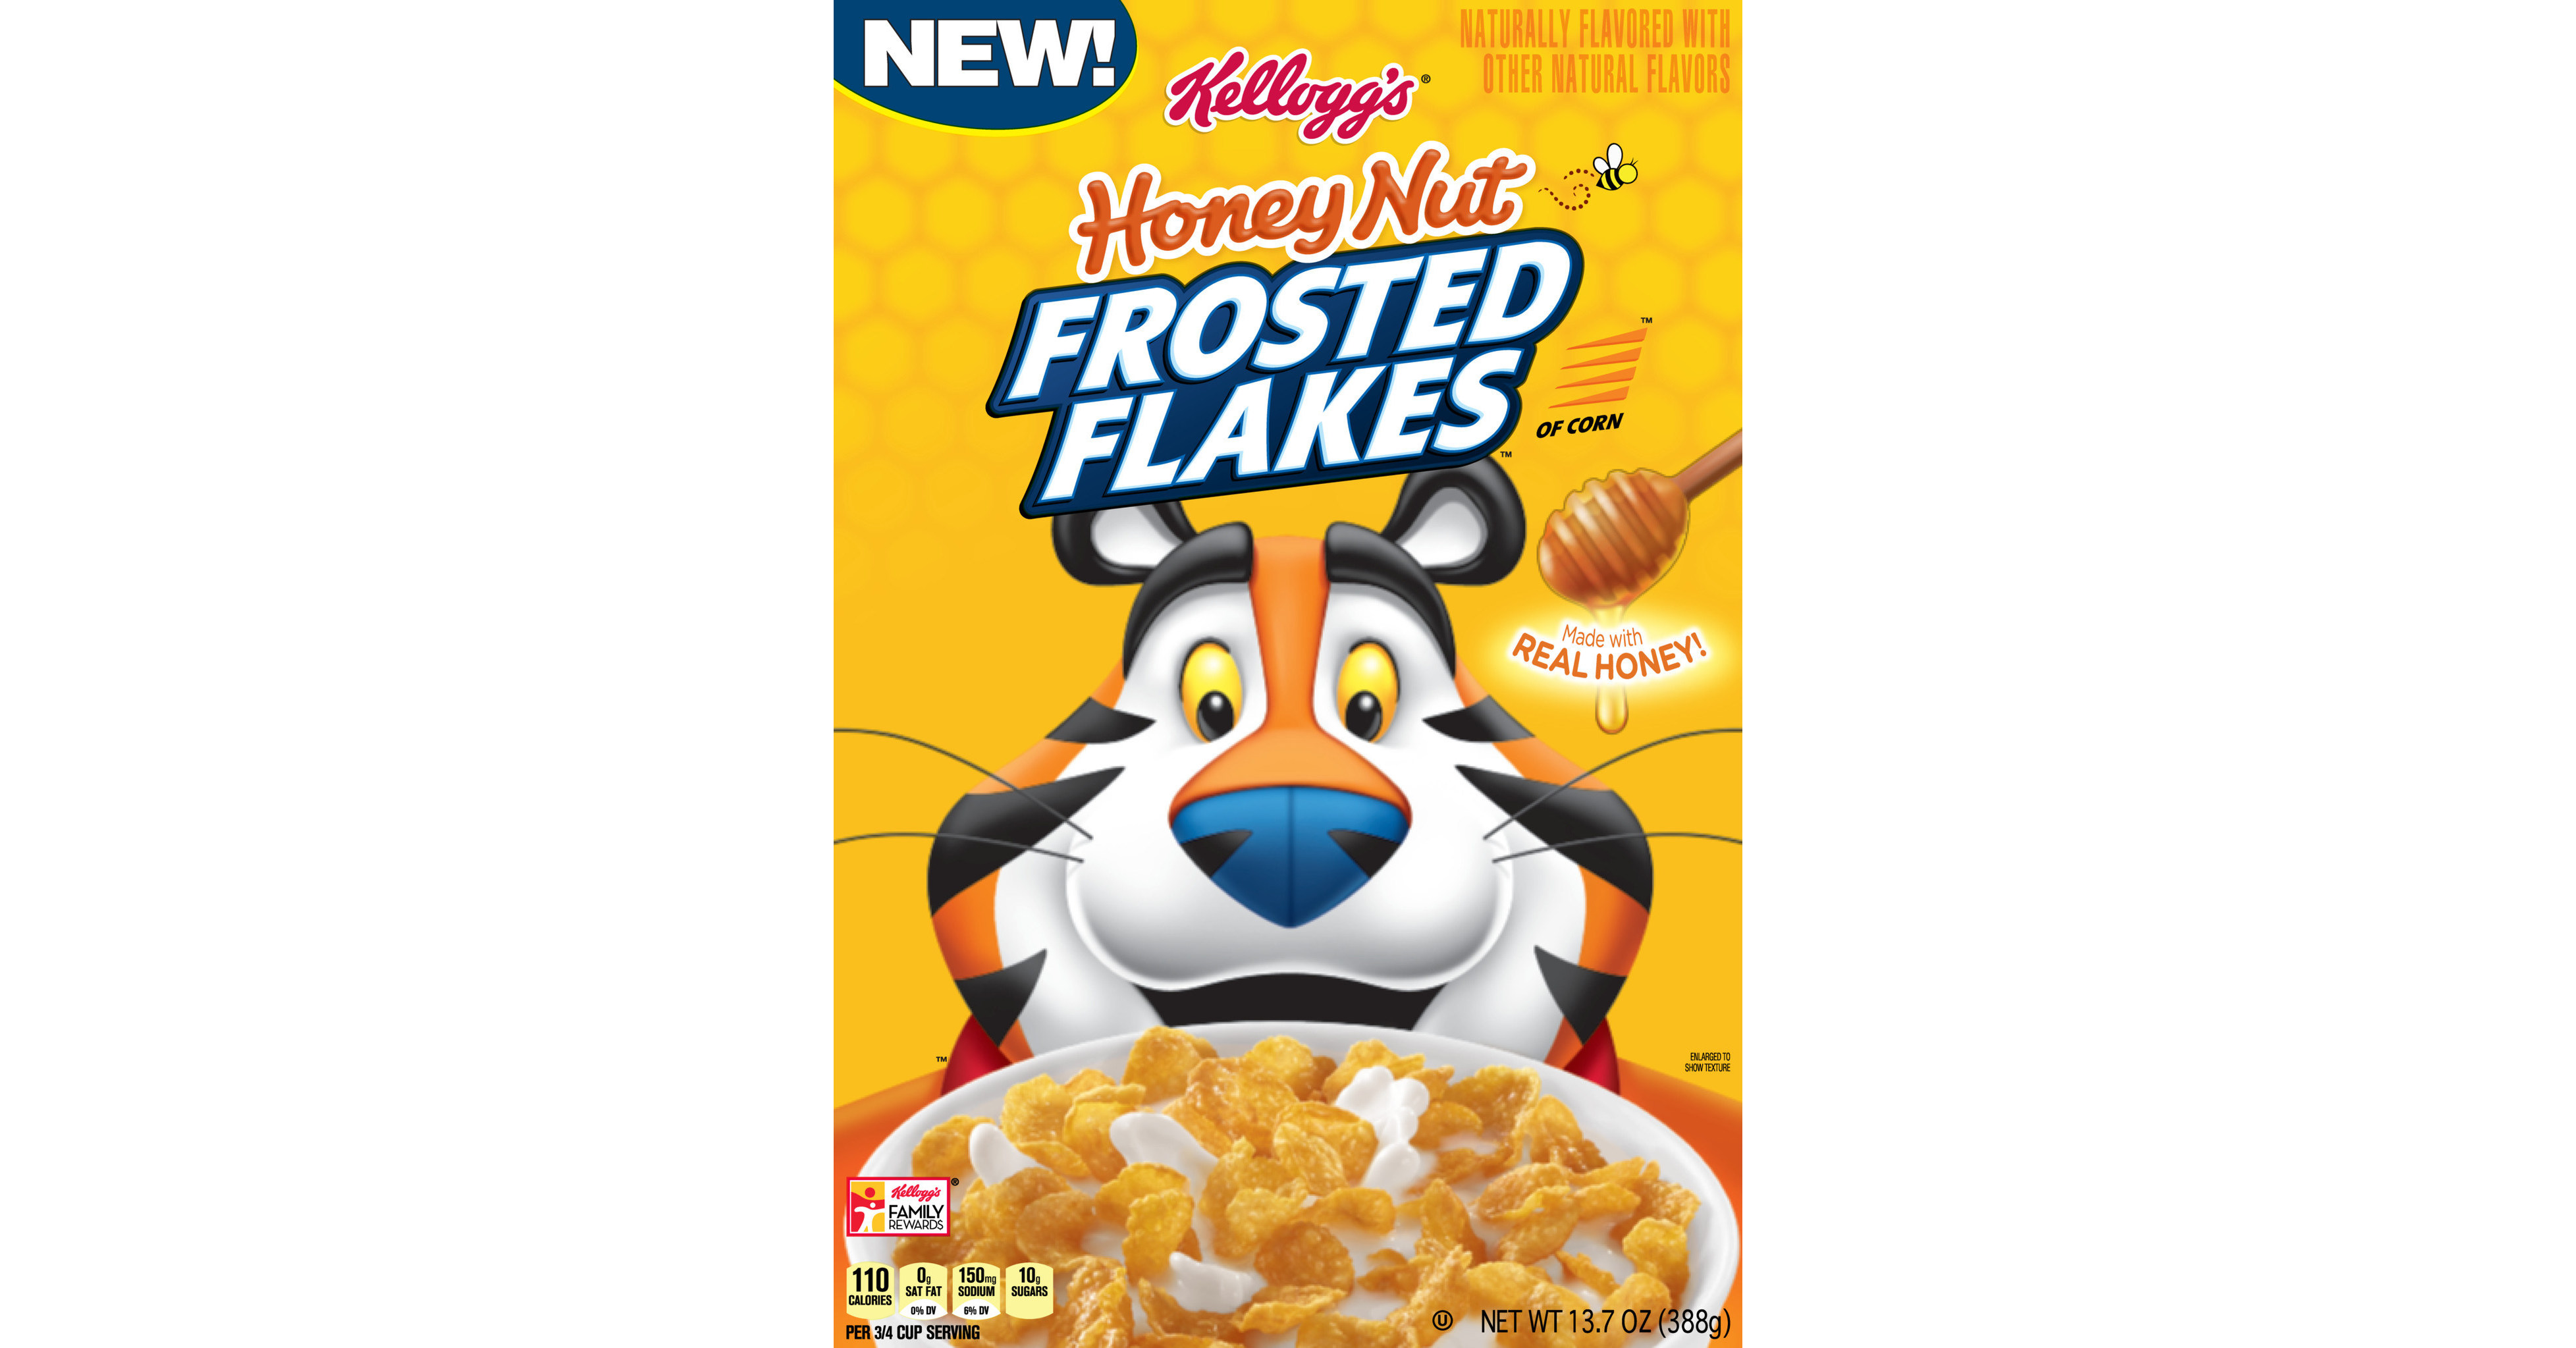 Kellogg's New Honey Nut Frosted Flakes Cereal is Trolling General